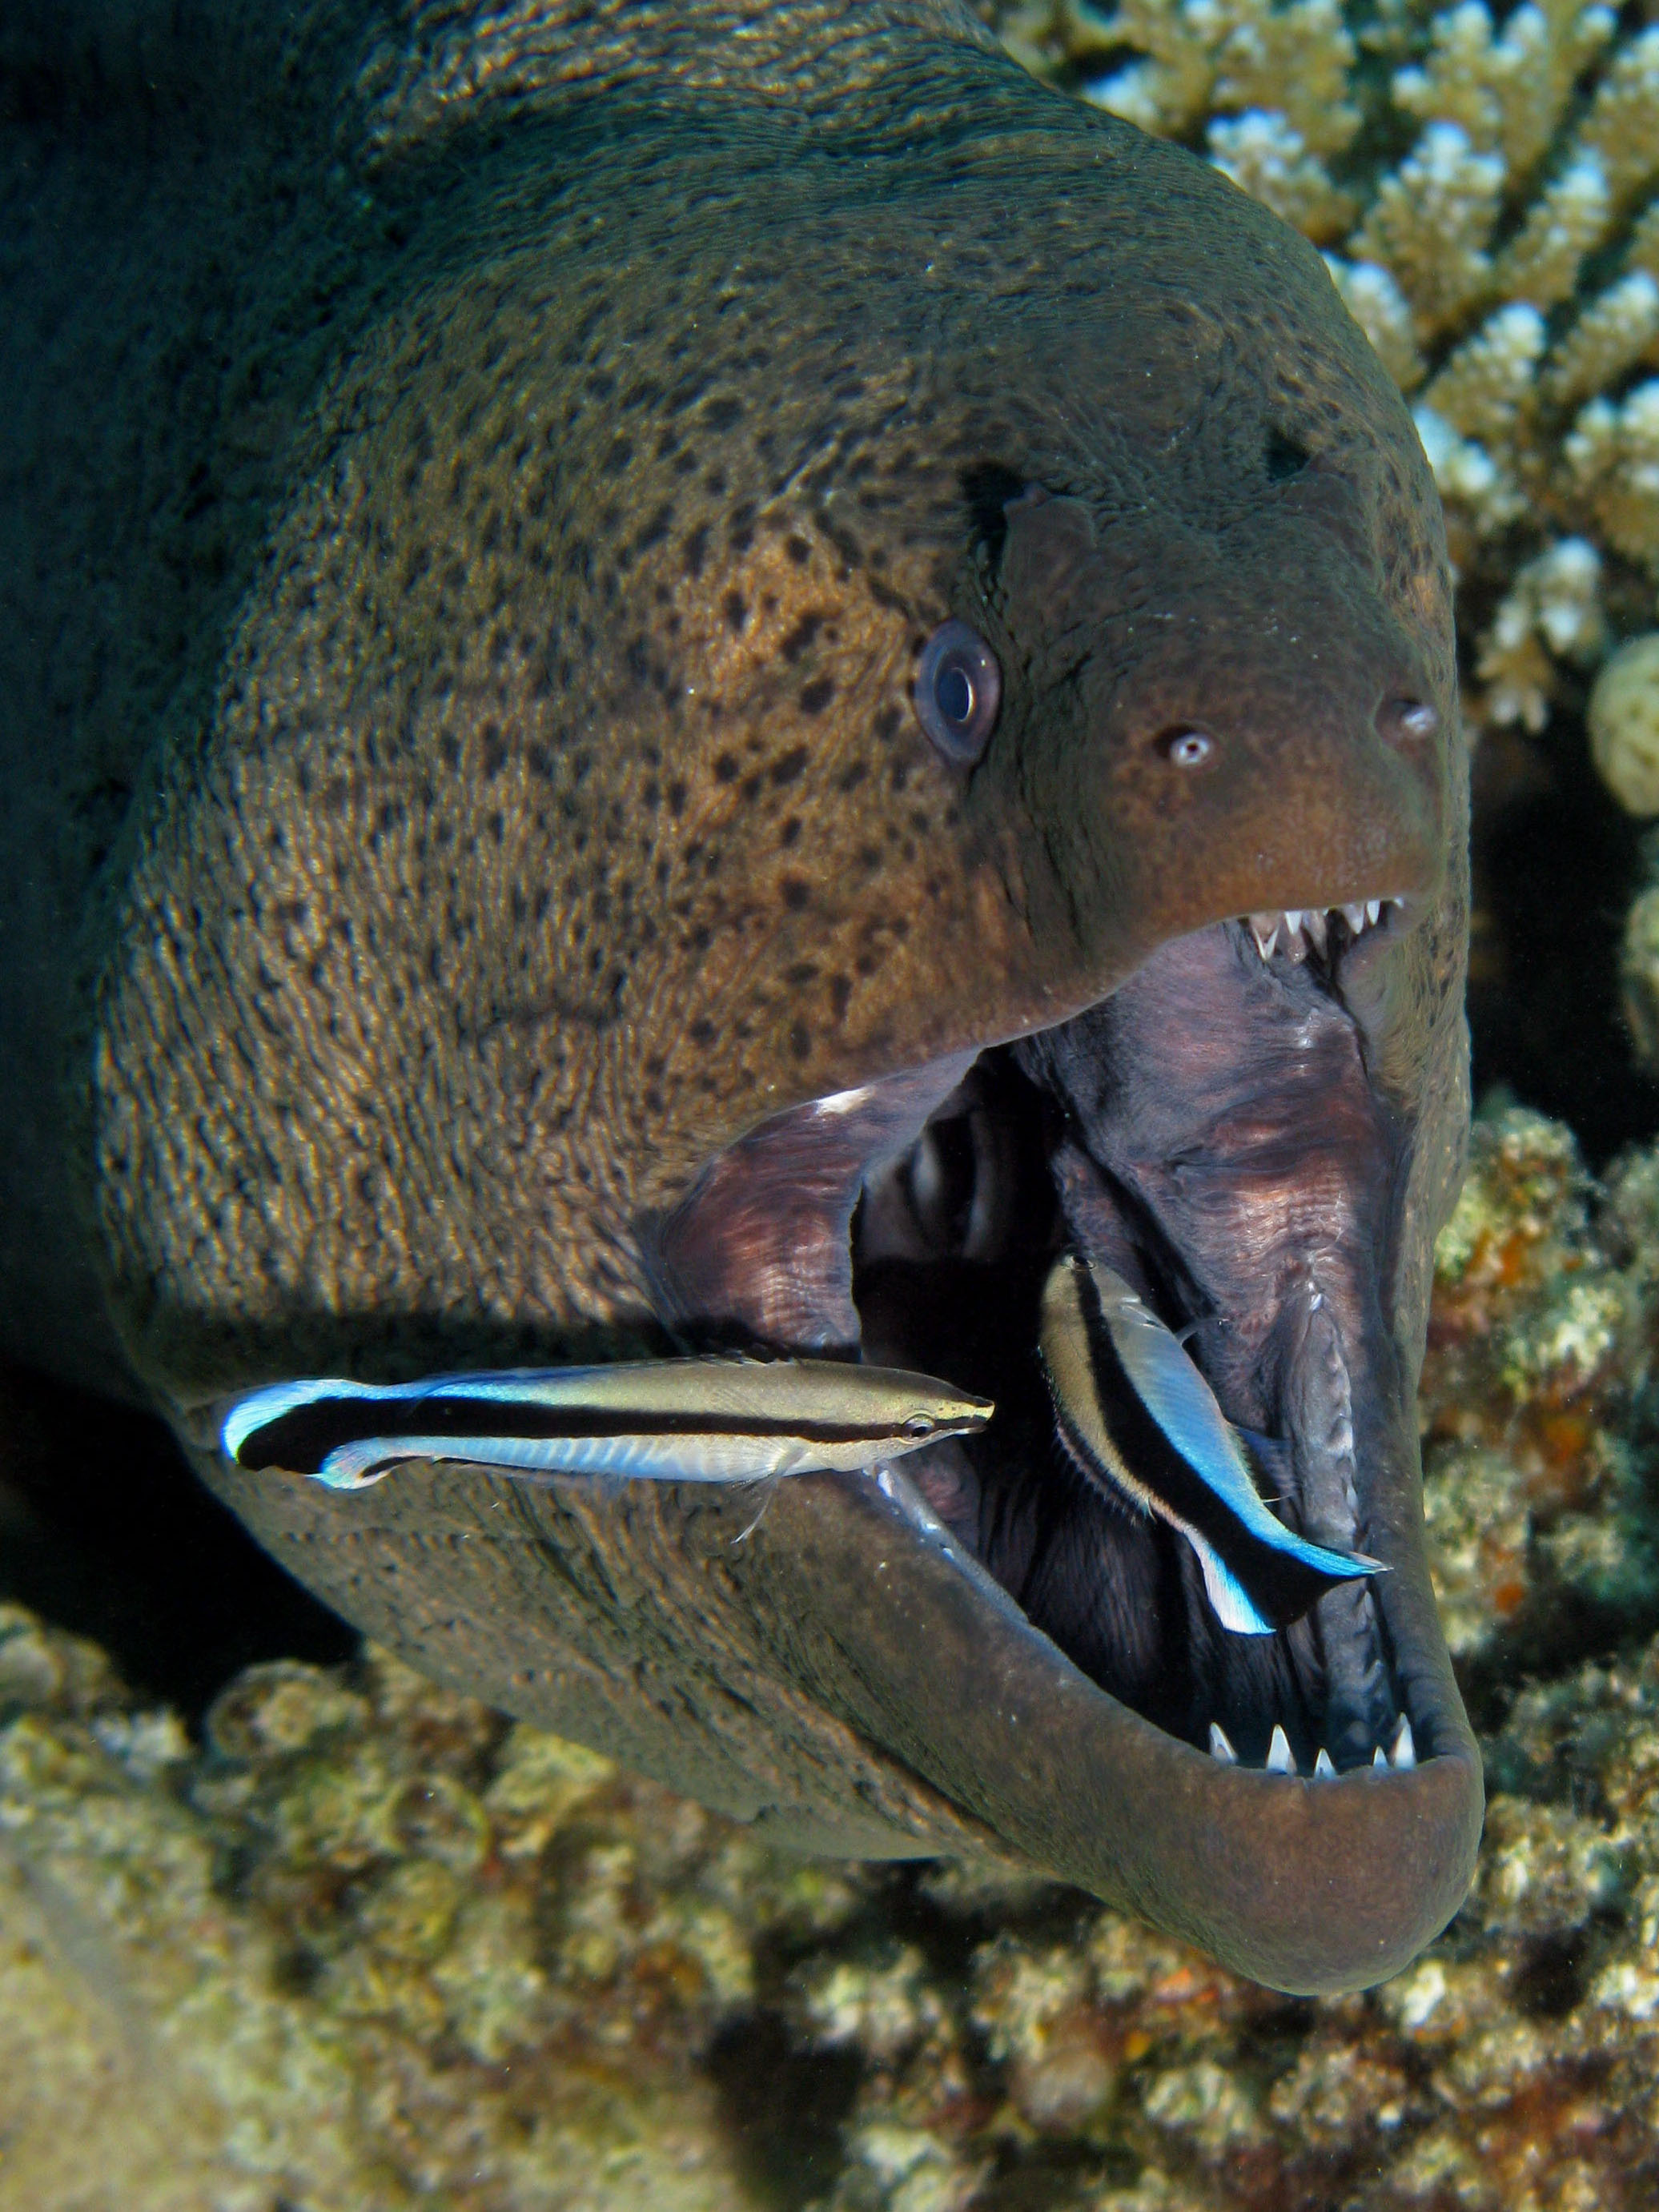 A moray eel peers out from rocky coral structures and is examined by small reef fish